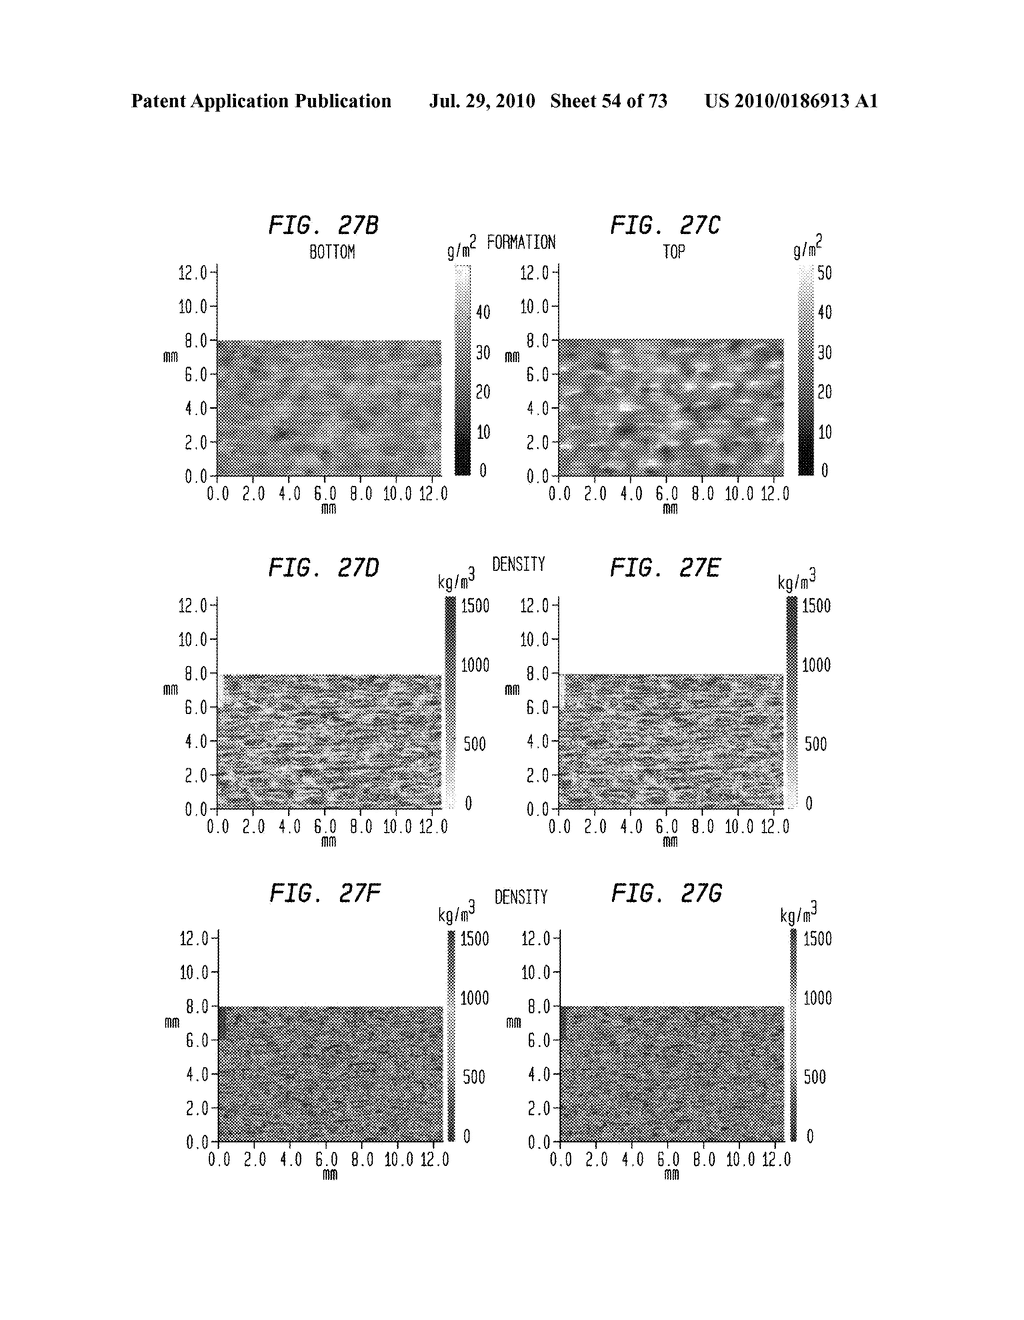 Belt-Creped, Variable Local Basis Weight Absorbent Sheet Prepared With Perforated Polymeric Belt - diagram, schematic, and image 55